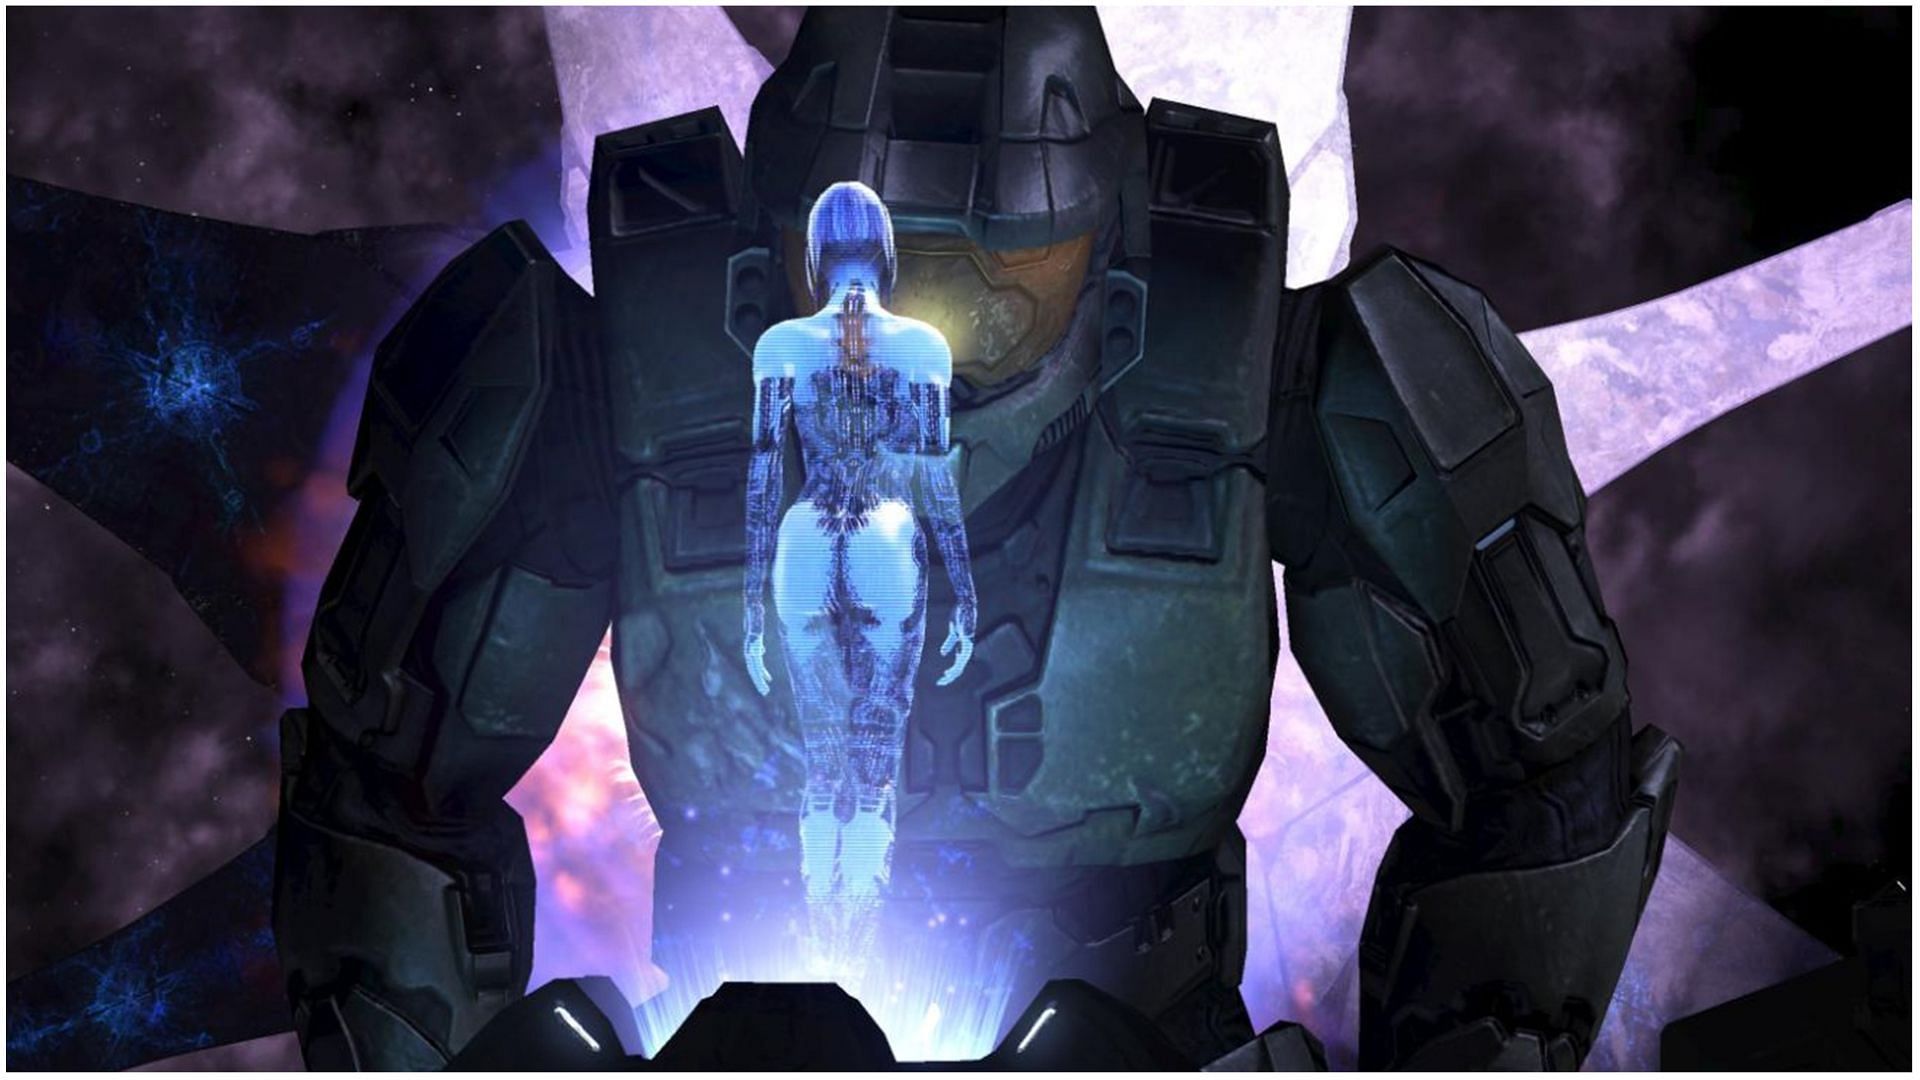 The Master Chief and Cortana were an iconic pairing from video games until Cortana went evil (Image via Bungie)